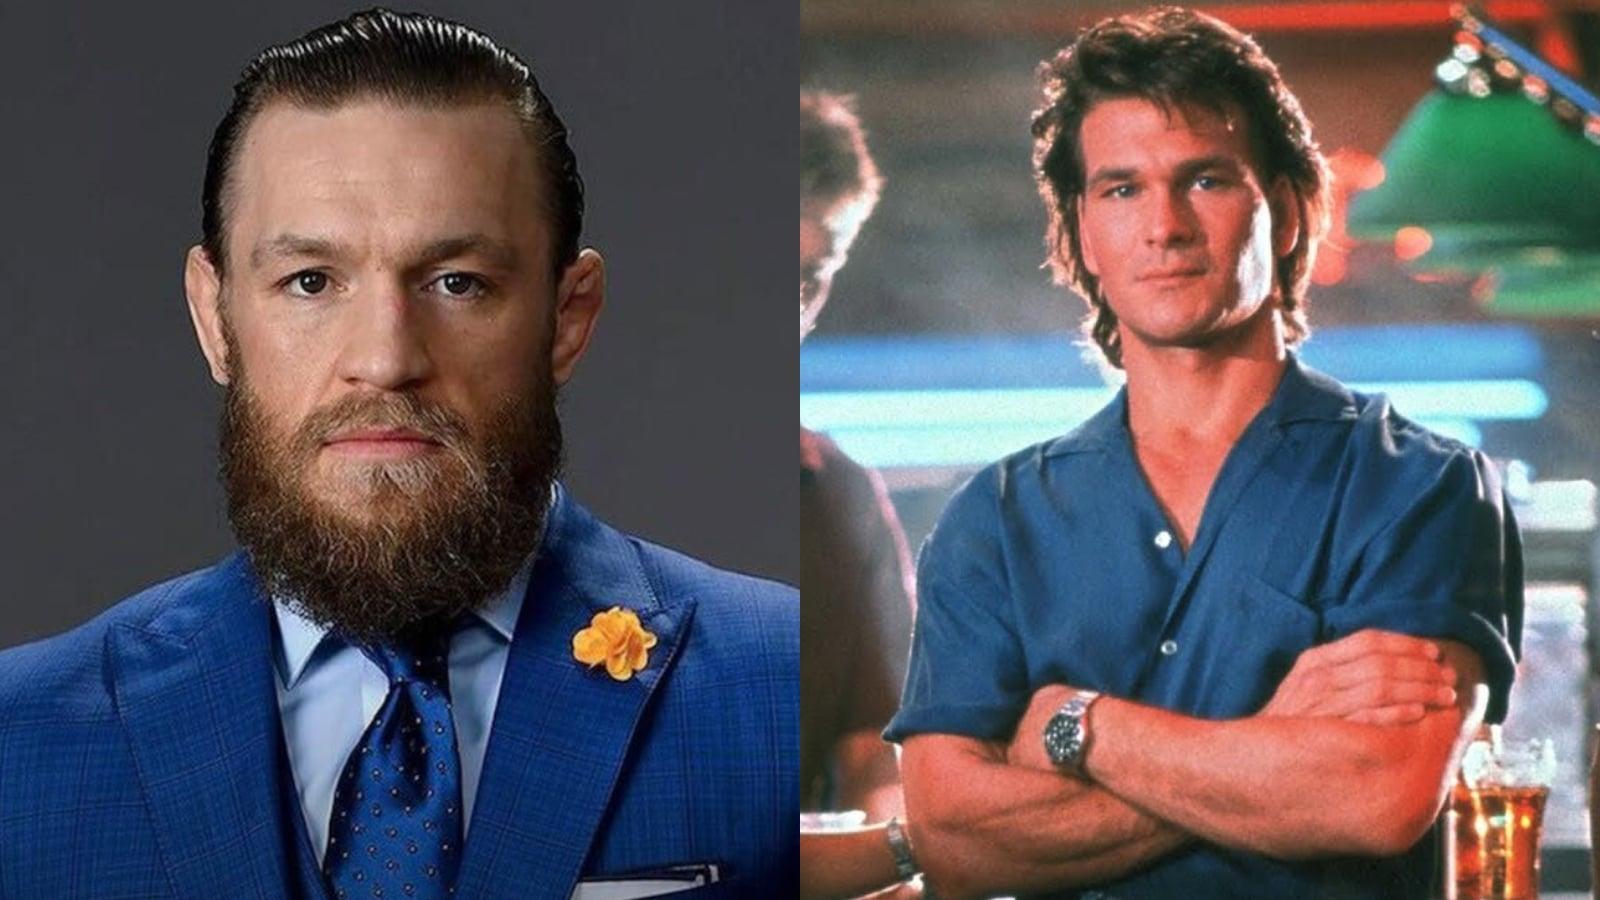 Conor McGregor and Patrick Swayze in Road House